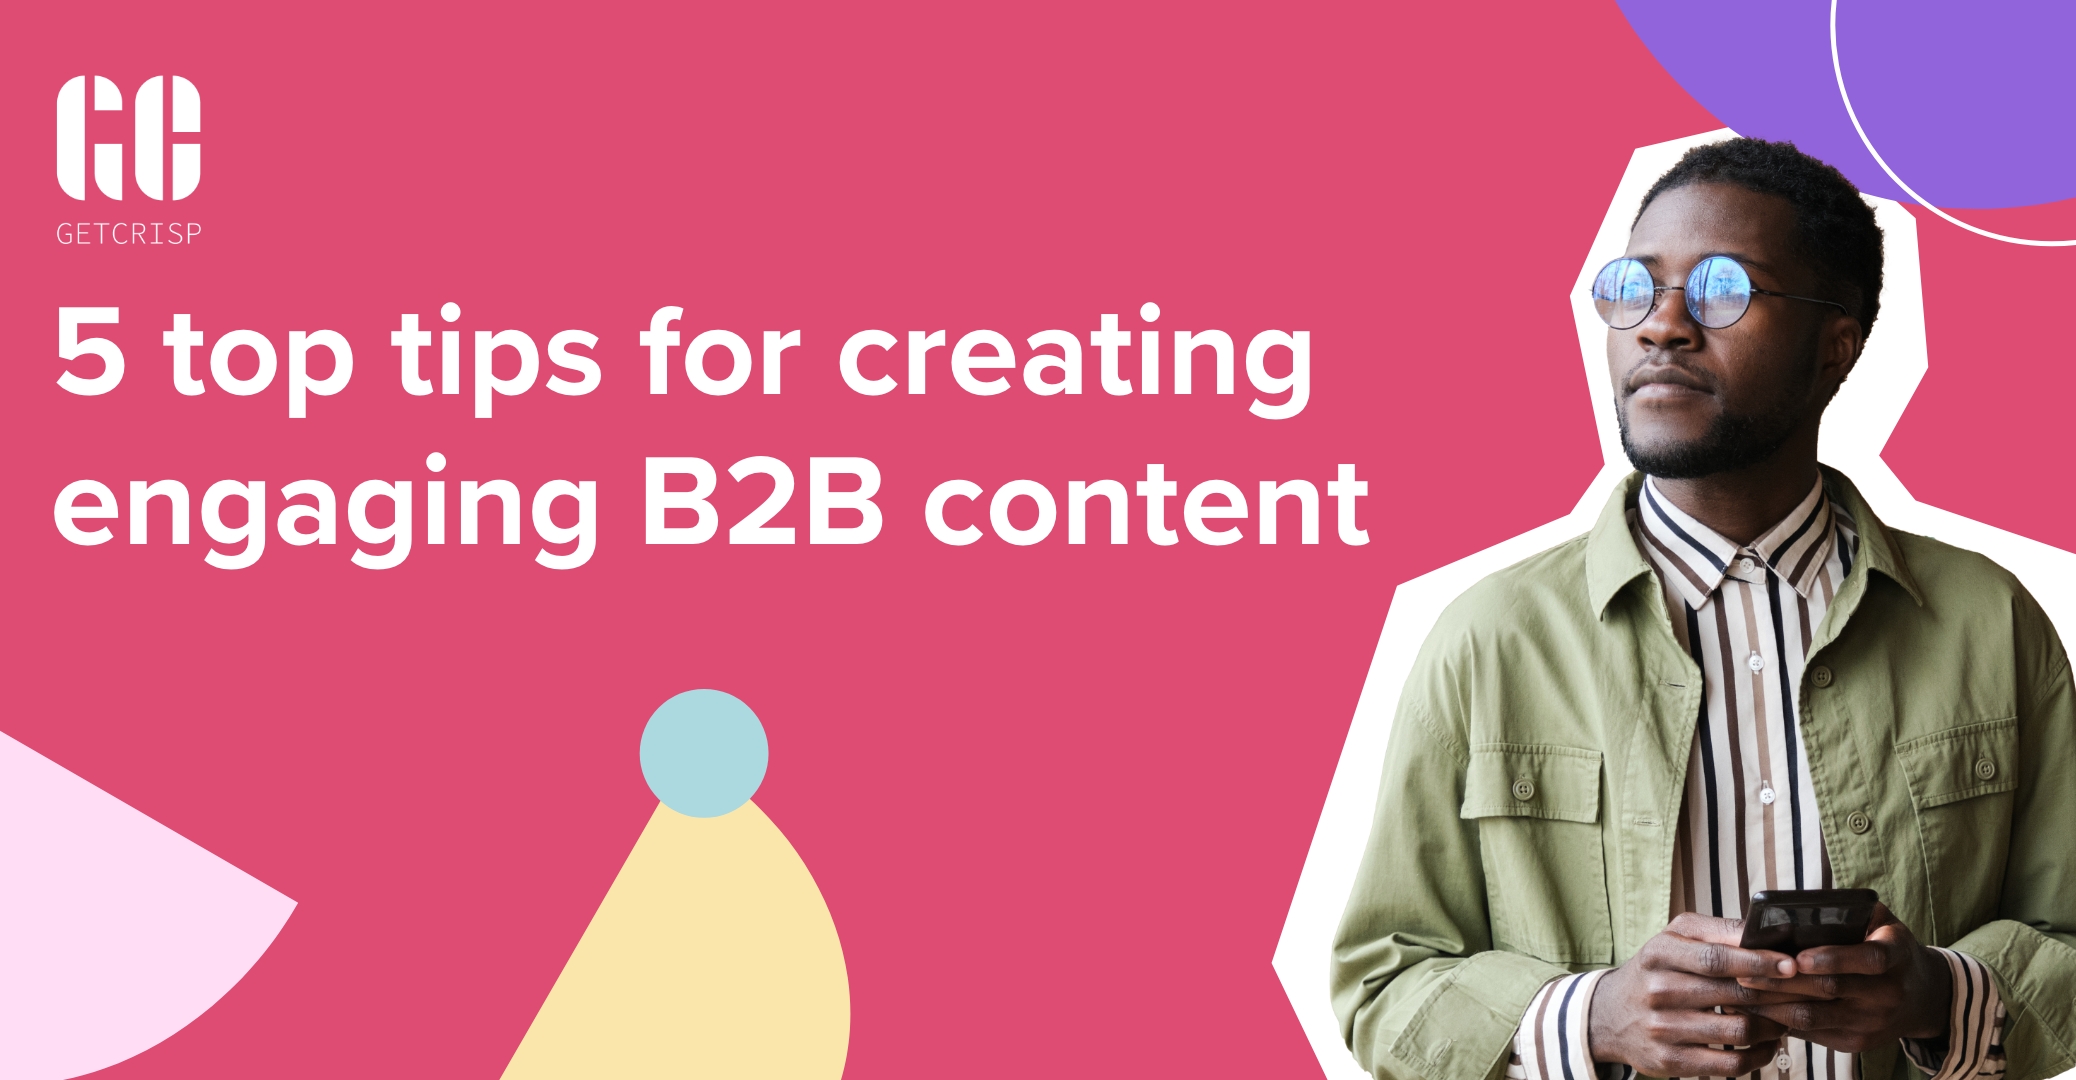 Title: Top 5 tips for creating engaging B2B content